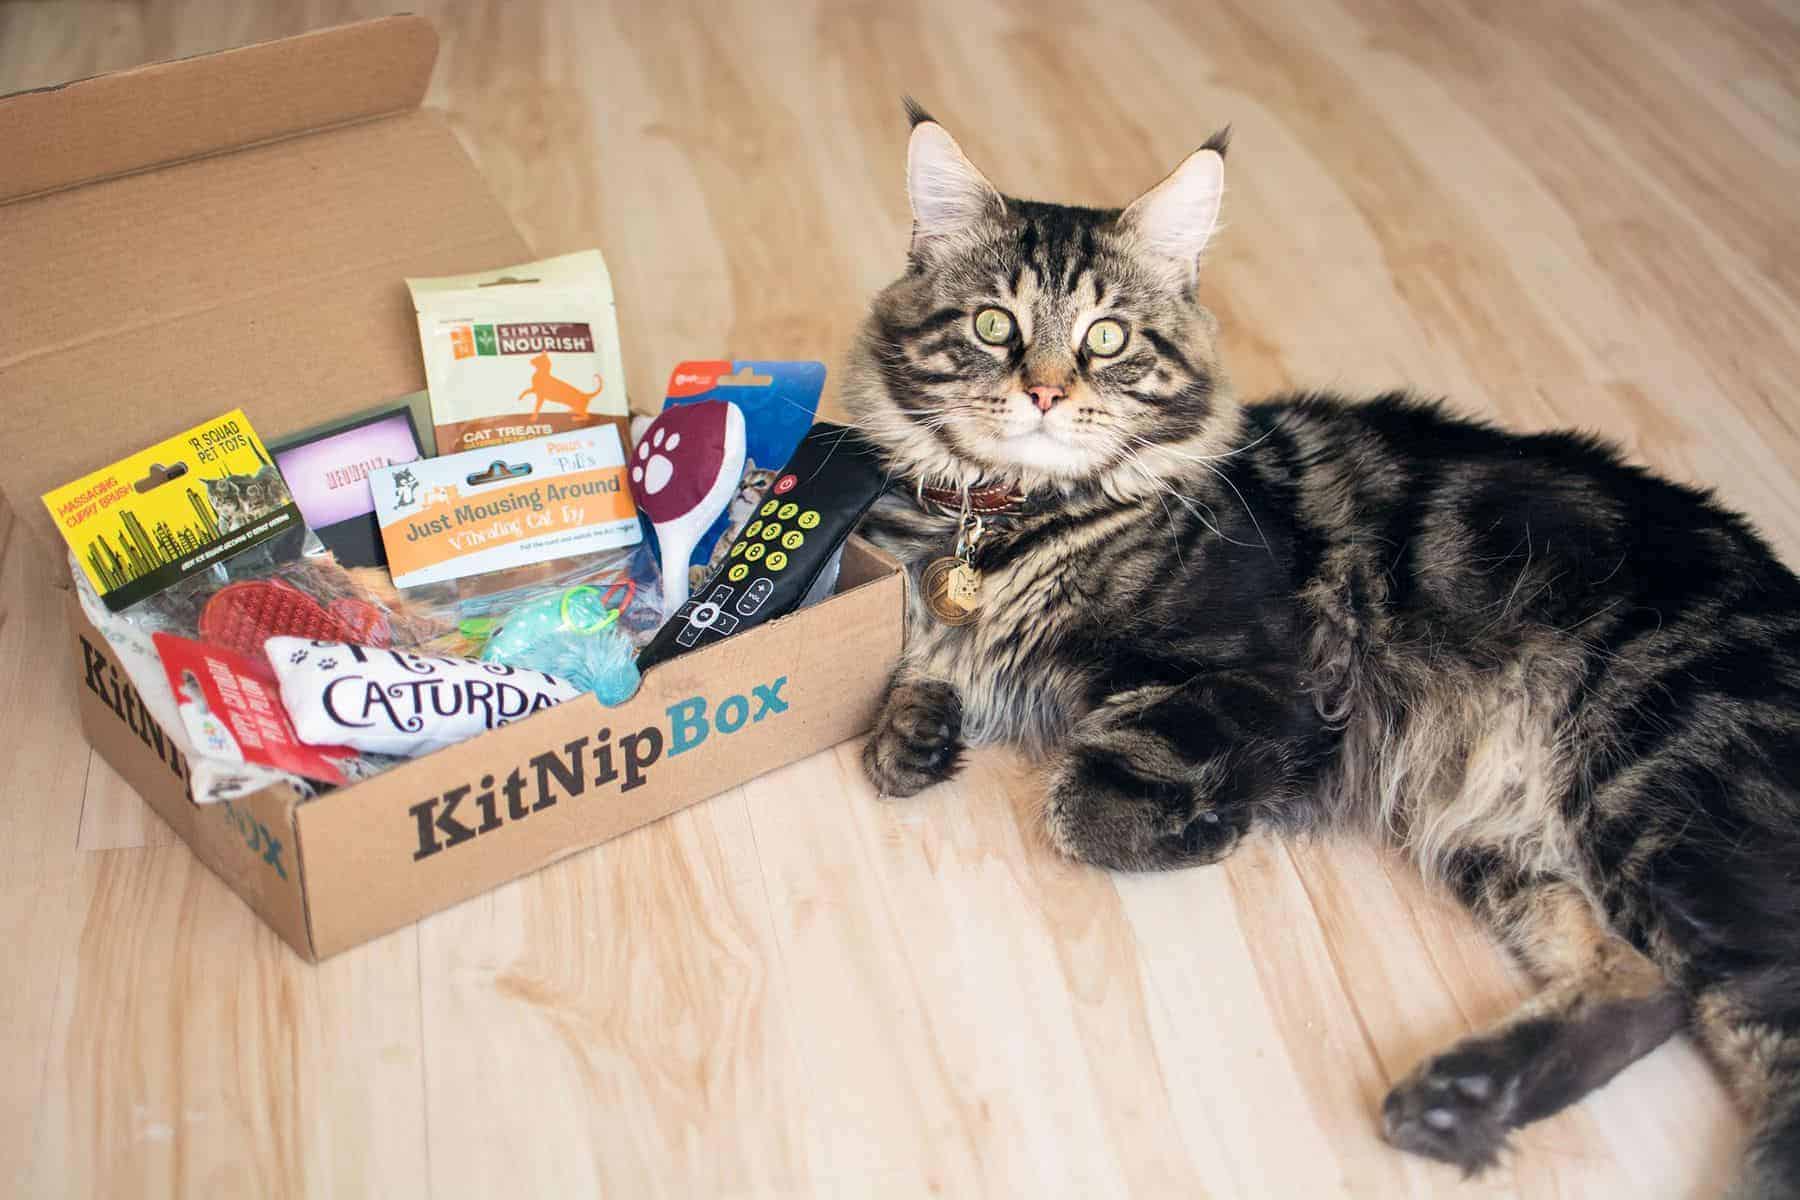 KitNipBox a monthly box of cat toys, treats, accessories